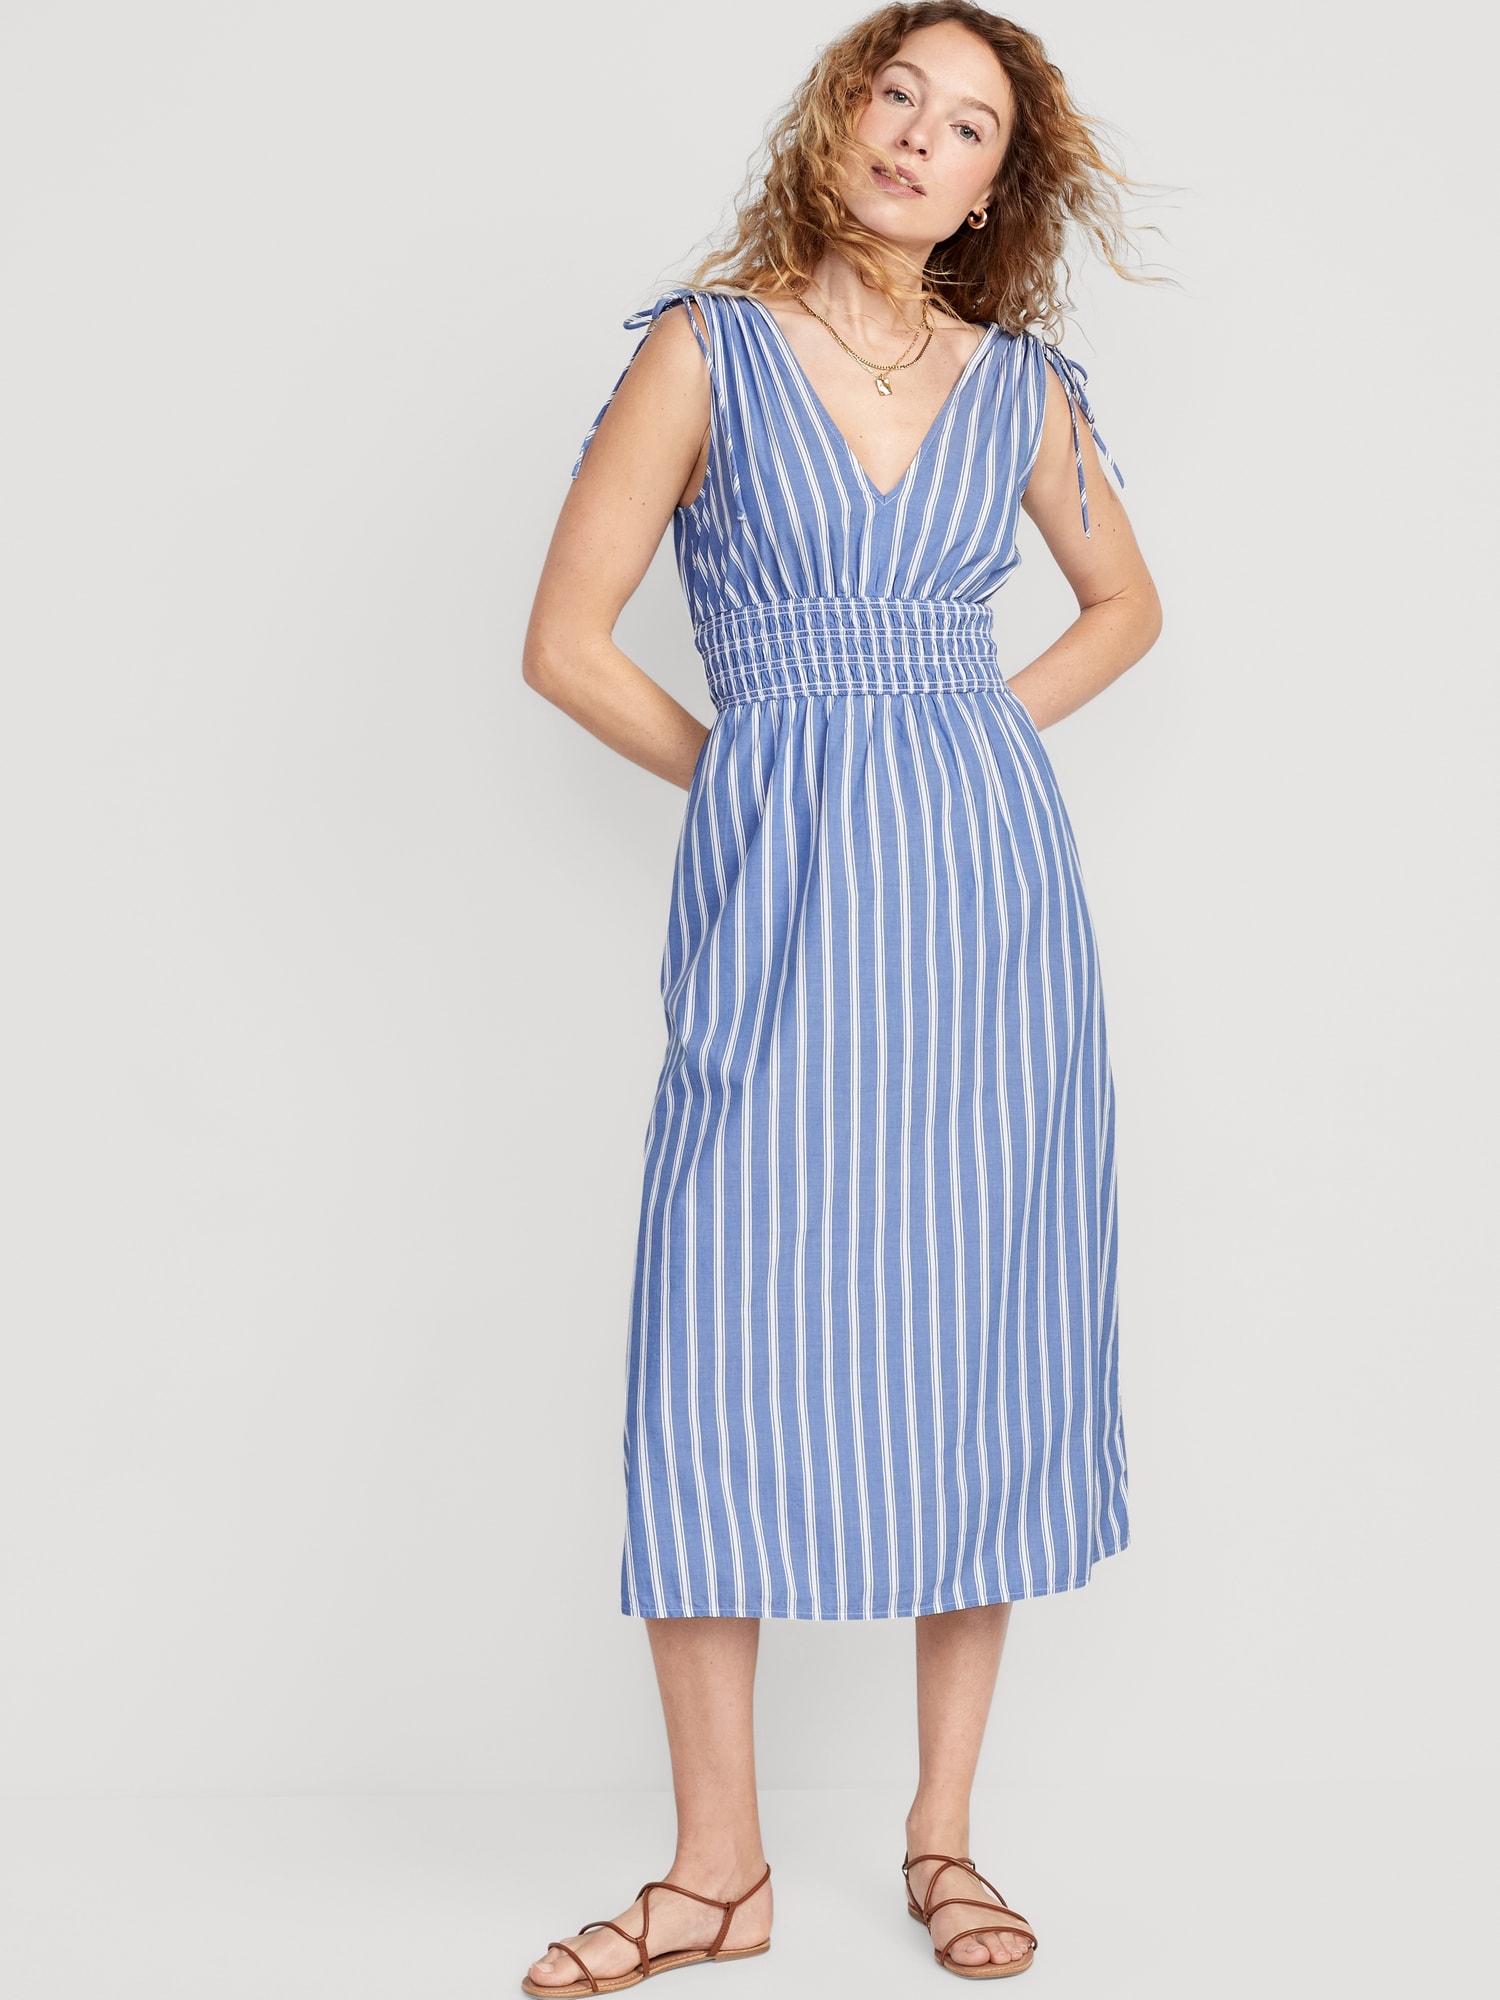 Striped Fit and Flare Dress